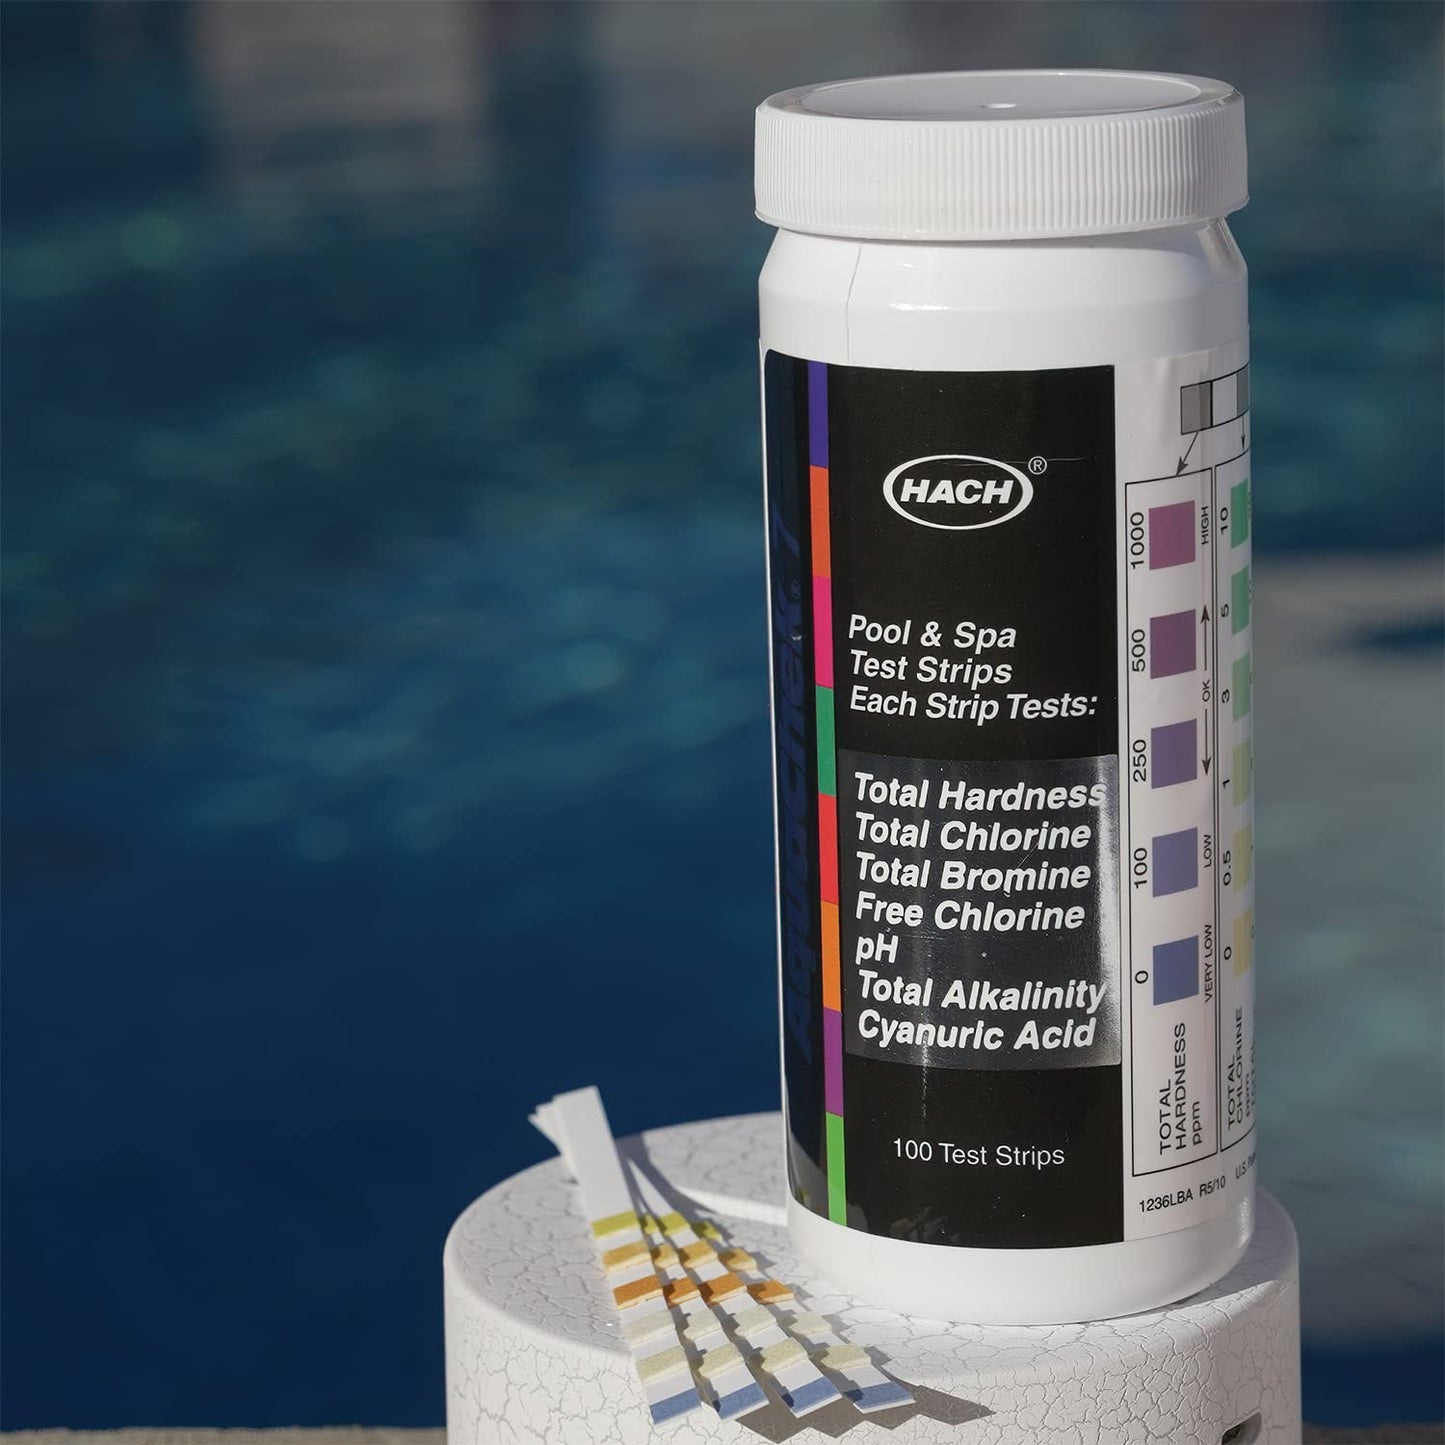 AquaChek 7-Way Pool and Spa Test Strips - Silver Pool Test Strips For pH, Total Chlorine, Free Chlorine, Bromine, Alkalinity, Total Hardness, and Cyanuric Acid - Water Quality Testing Kit (100 Strips)